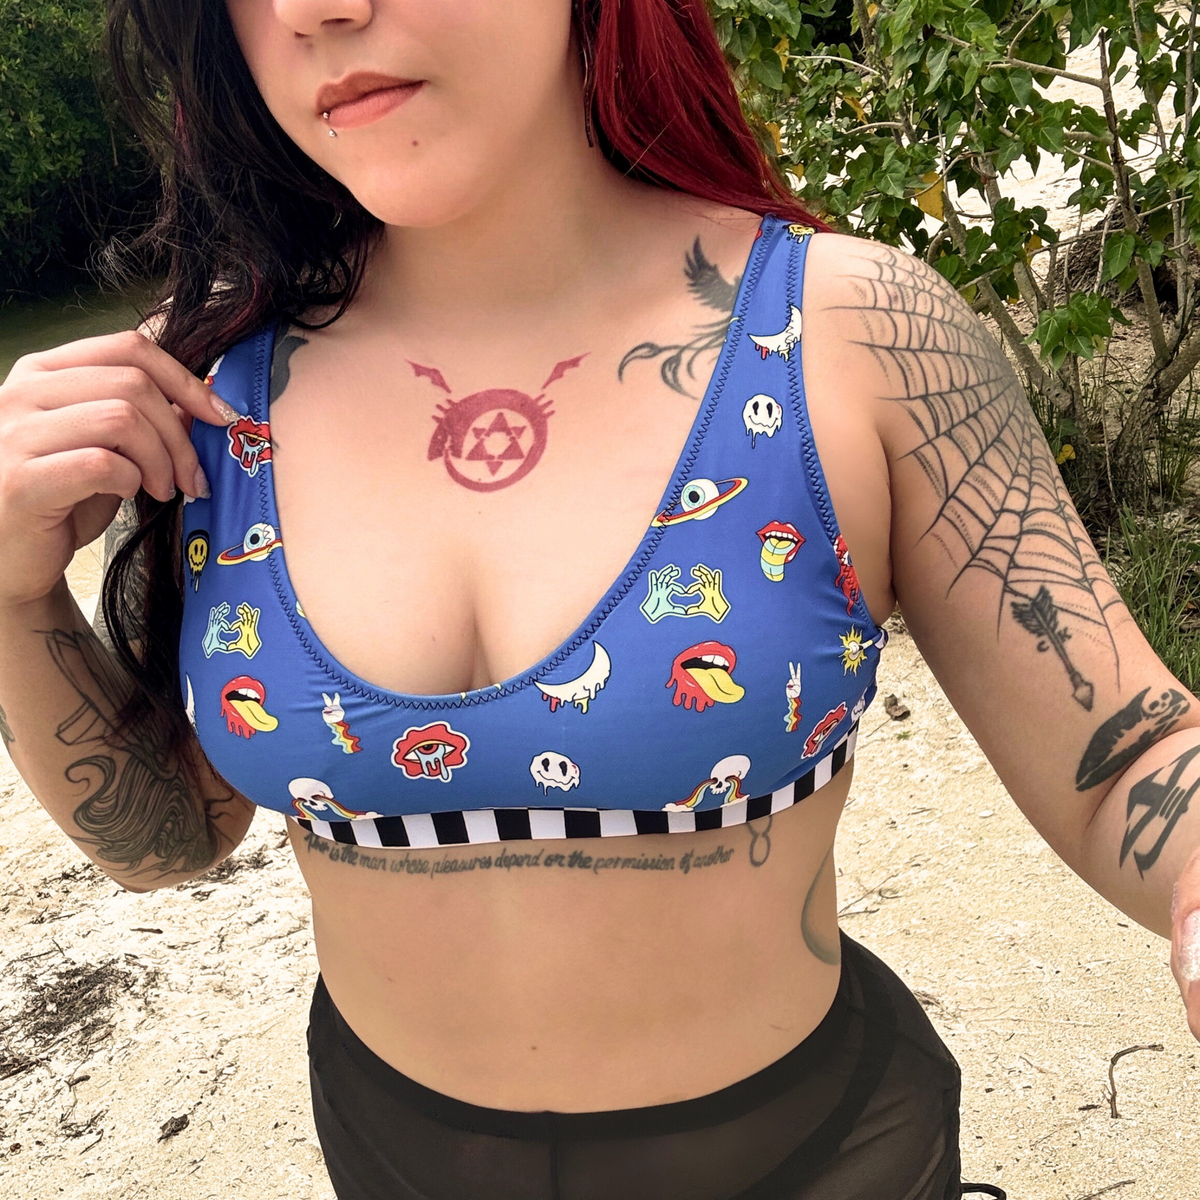 Blue, Bikini Top, All Over Print, Psychedelic, Skulls, Rainbow Eyes, Mouth, Tongue Out, Rainbow Circles, Moons, Rainbow Drops, Smiley Faces, Headphones